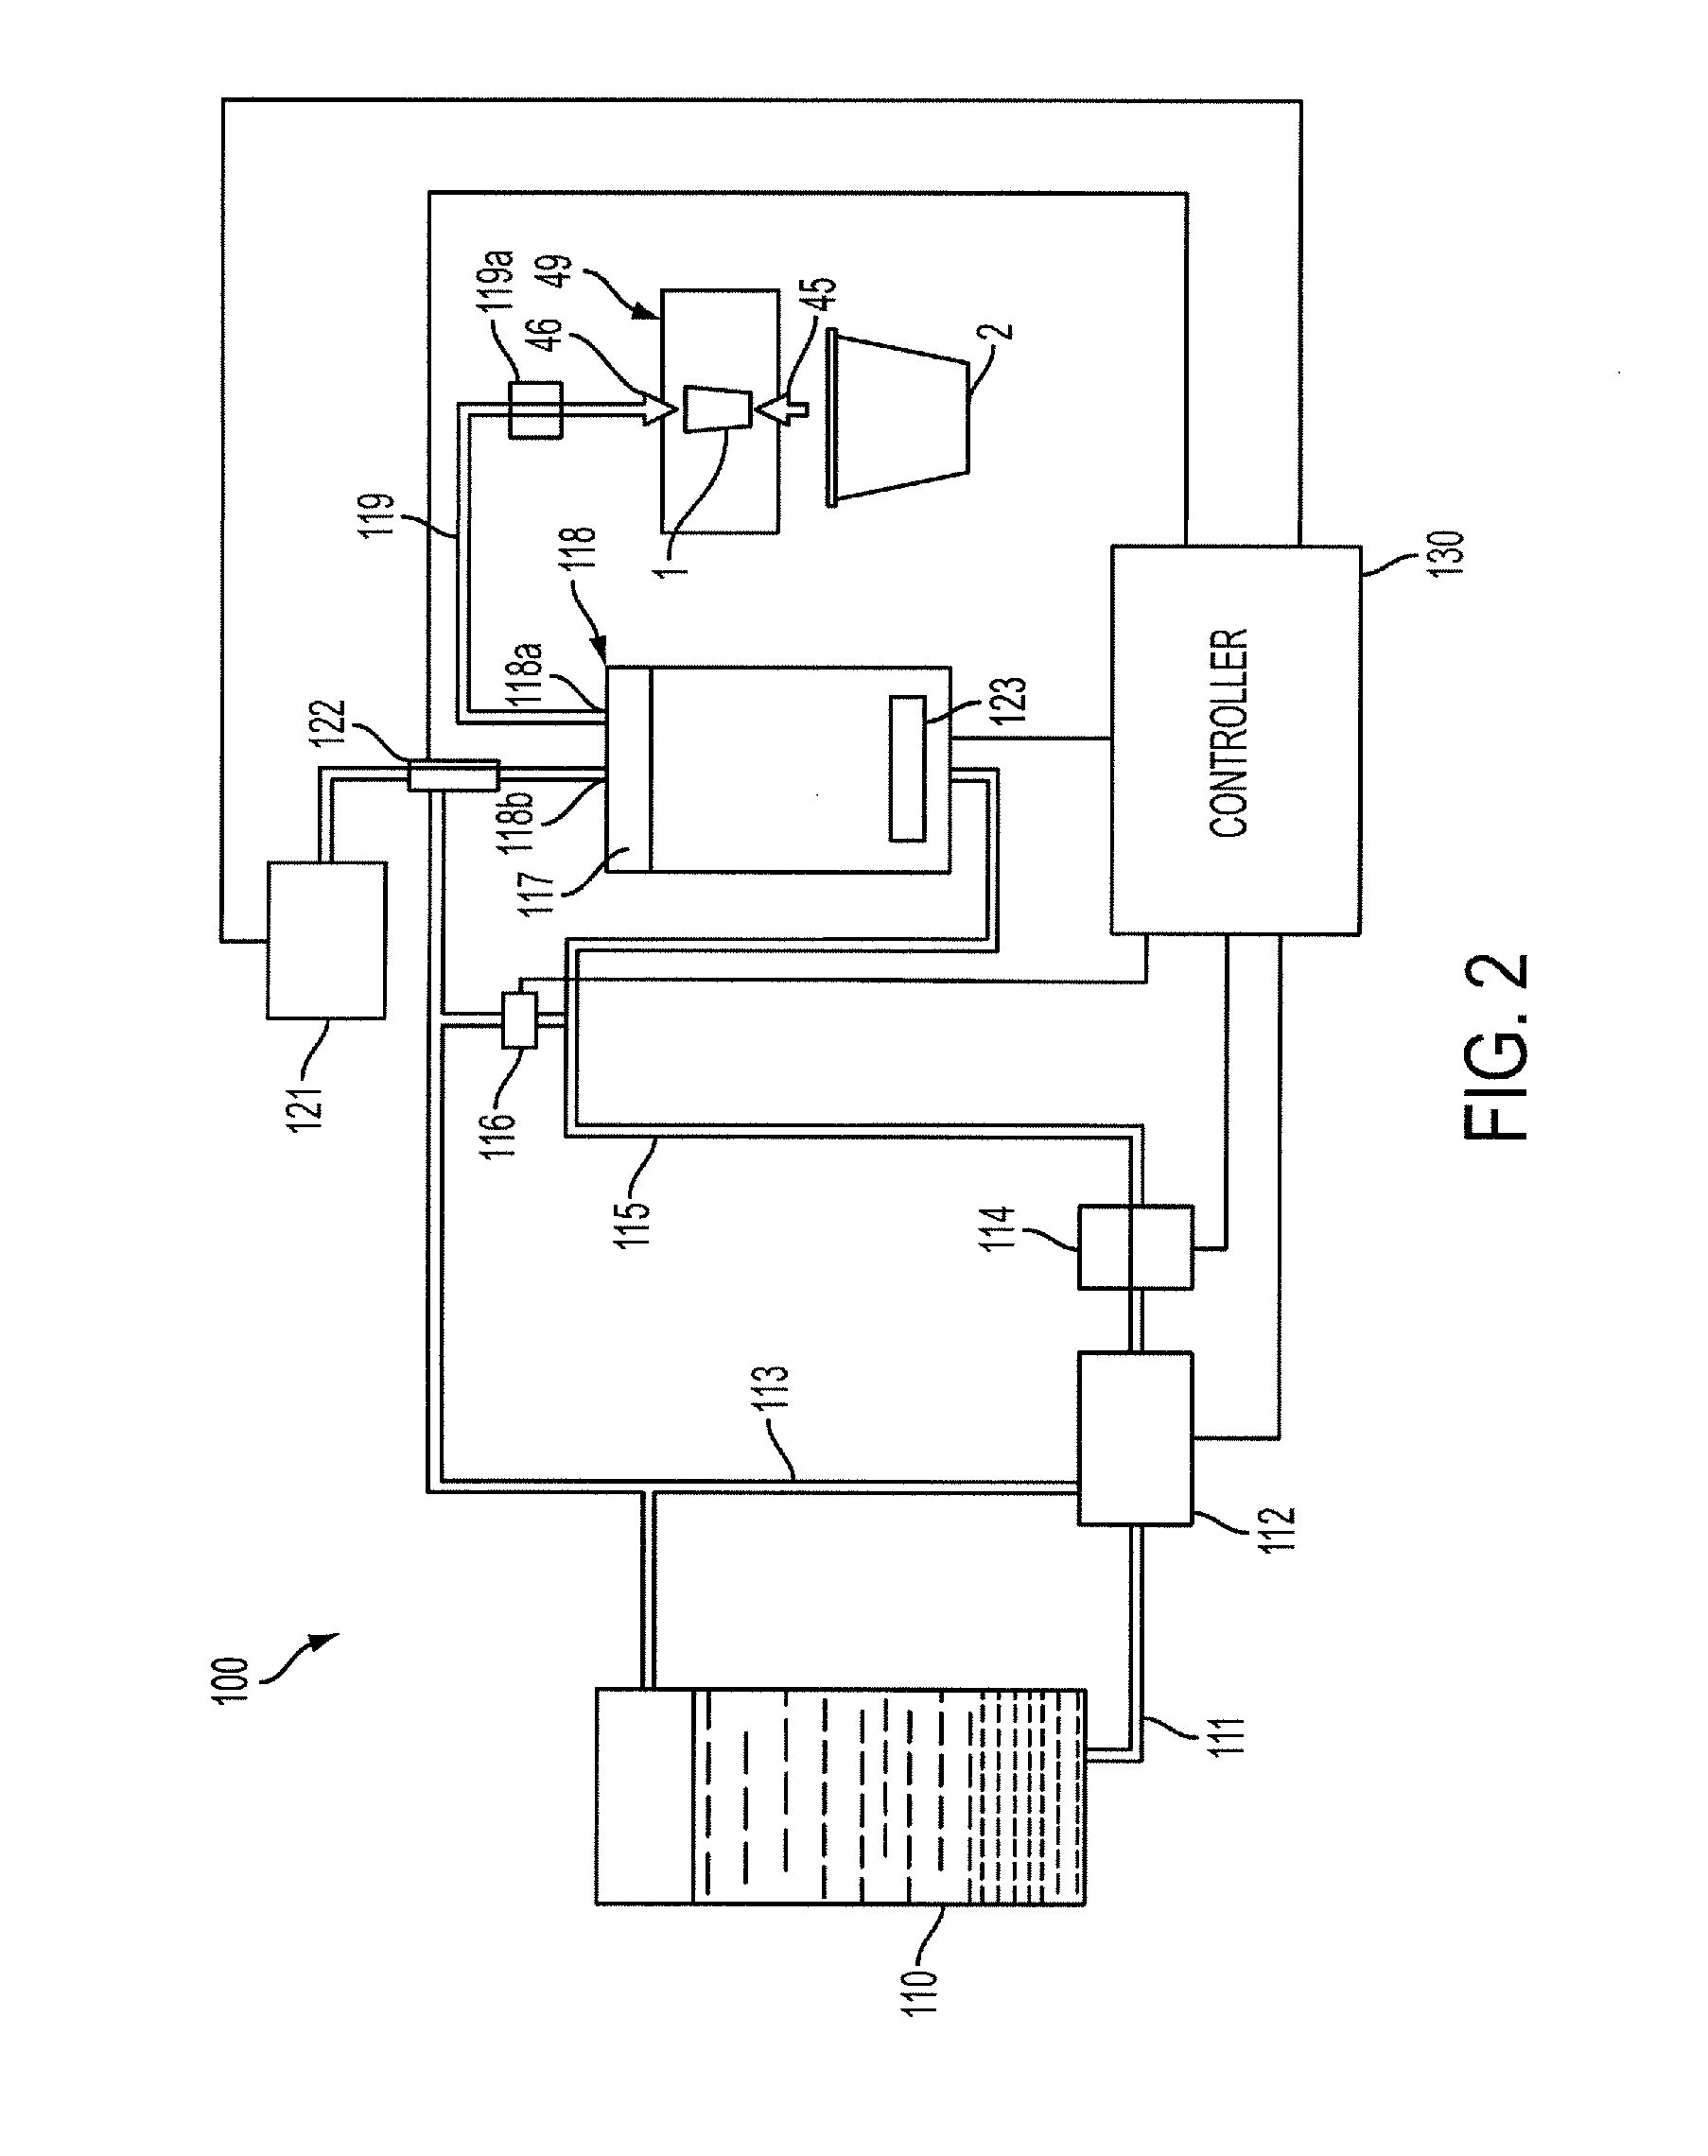 Beverage forming system having liquid delivery tank with expansion chamber